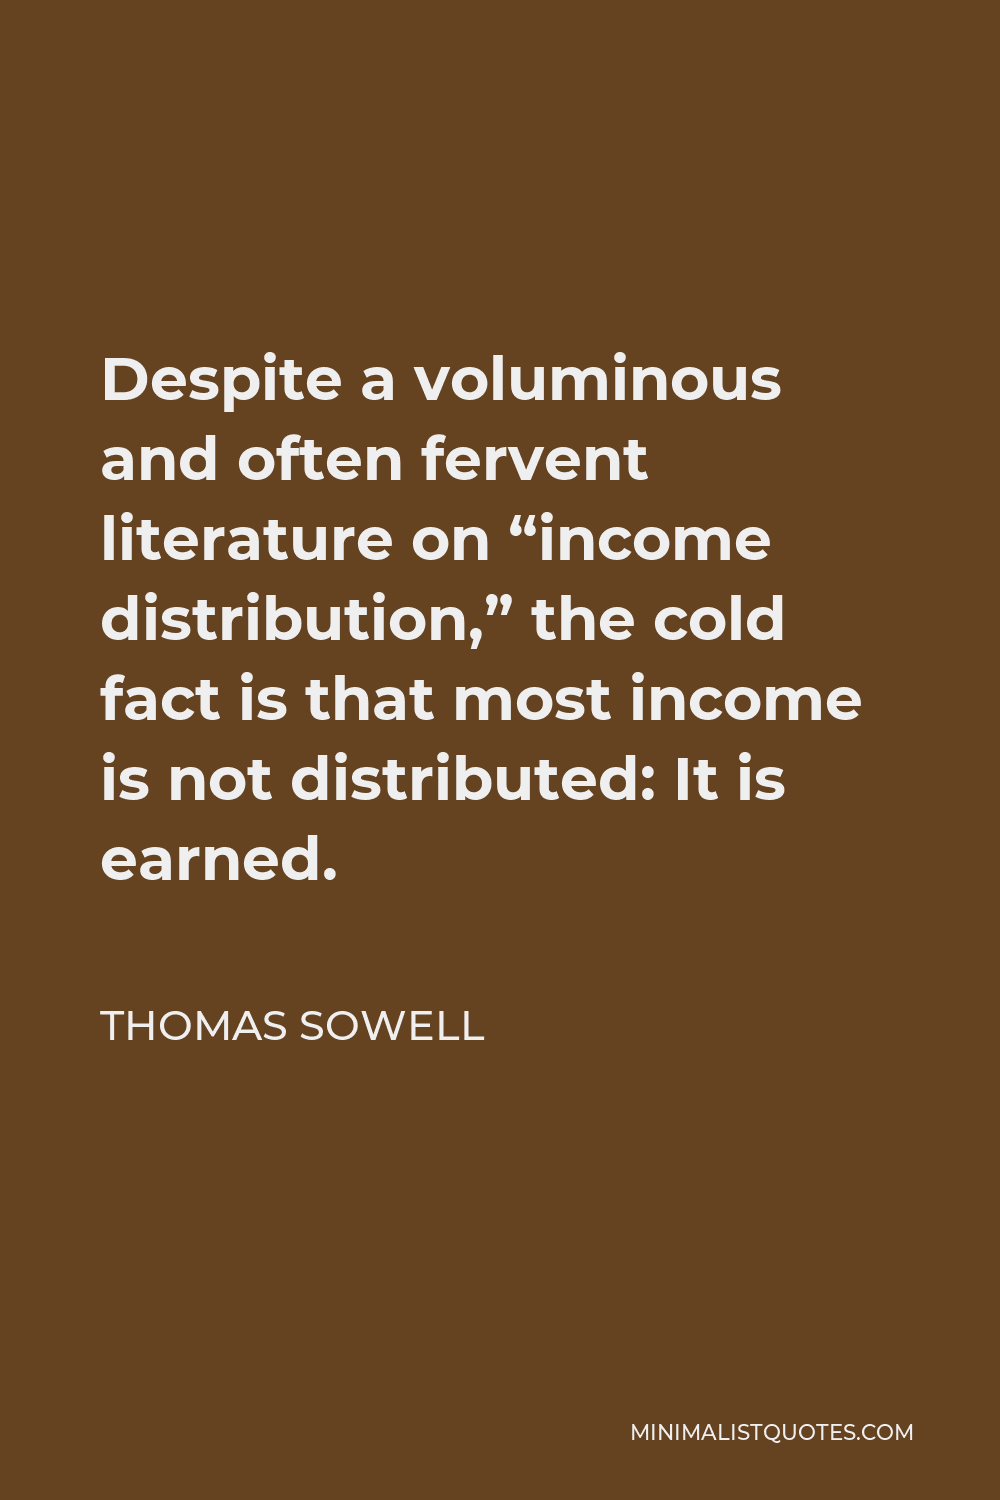 Thomas Sowell Quote - Despite a voluminous and often fervent literature on “income distribution,” the cold fact is that most income is not distributed: It is earned.